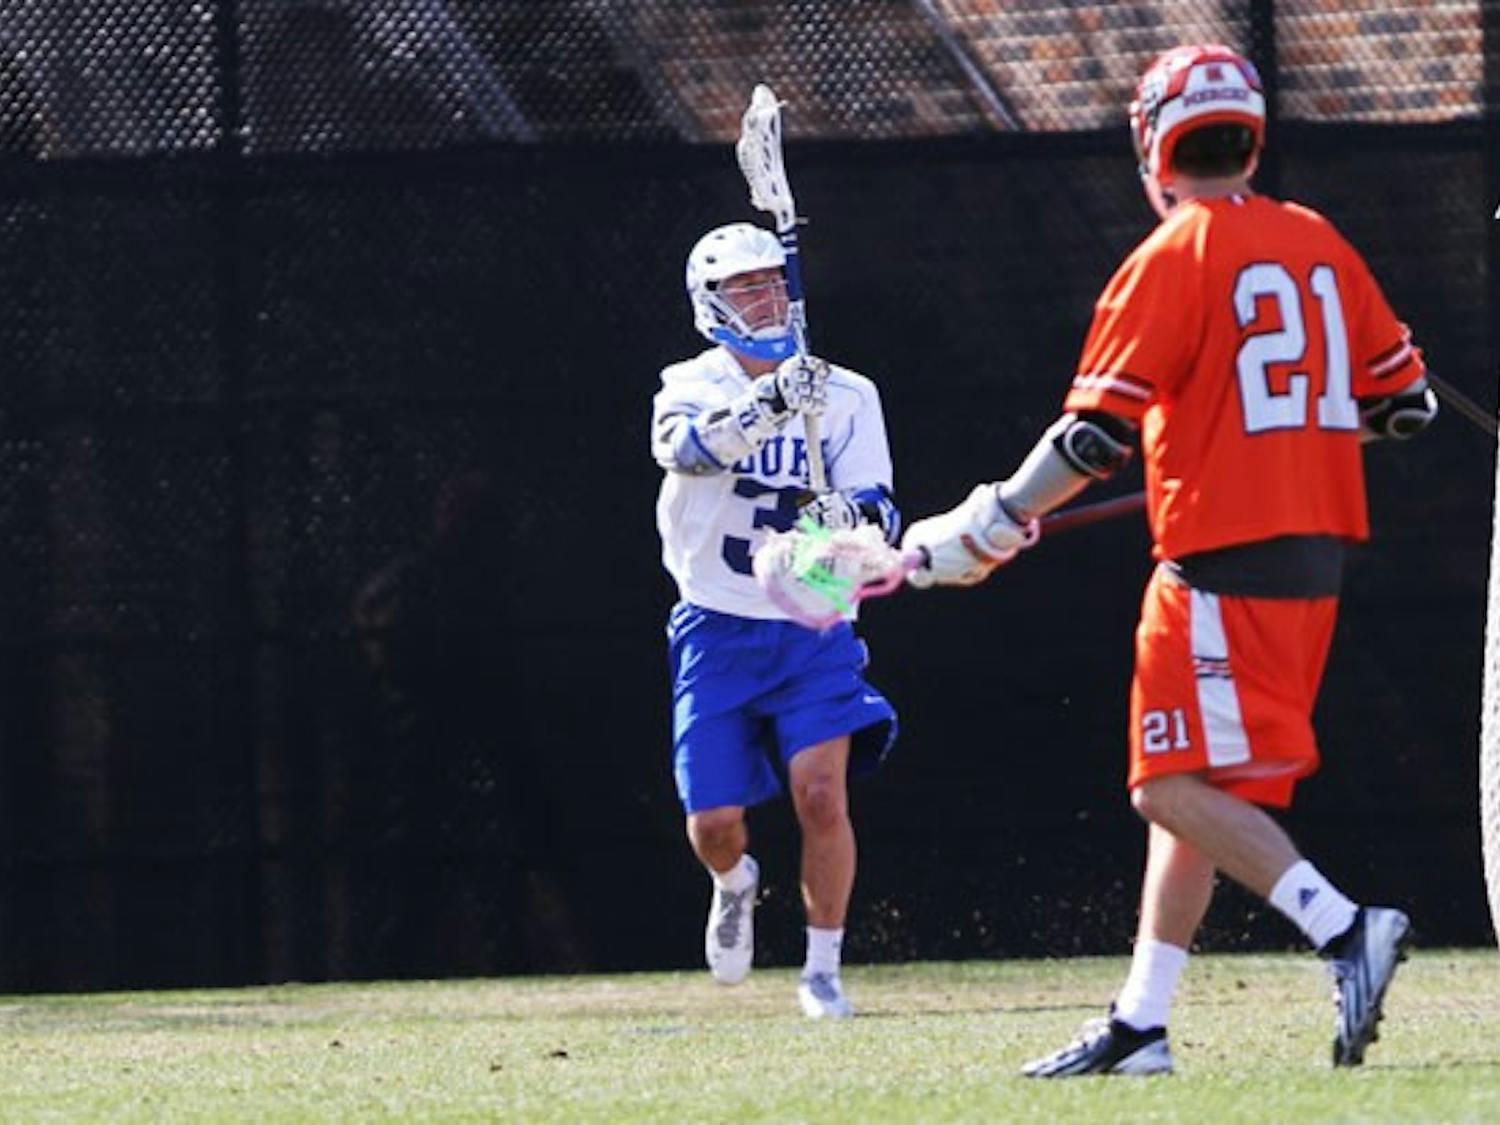 Junior Brendan Fowler ranks eighth in the country with a 60.8 faceoff percentage.